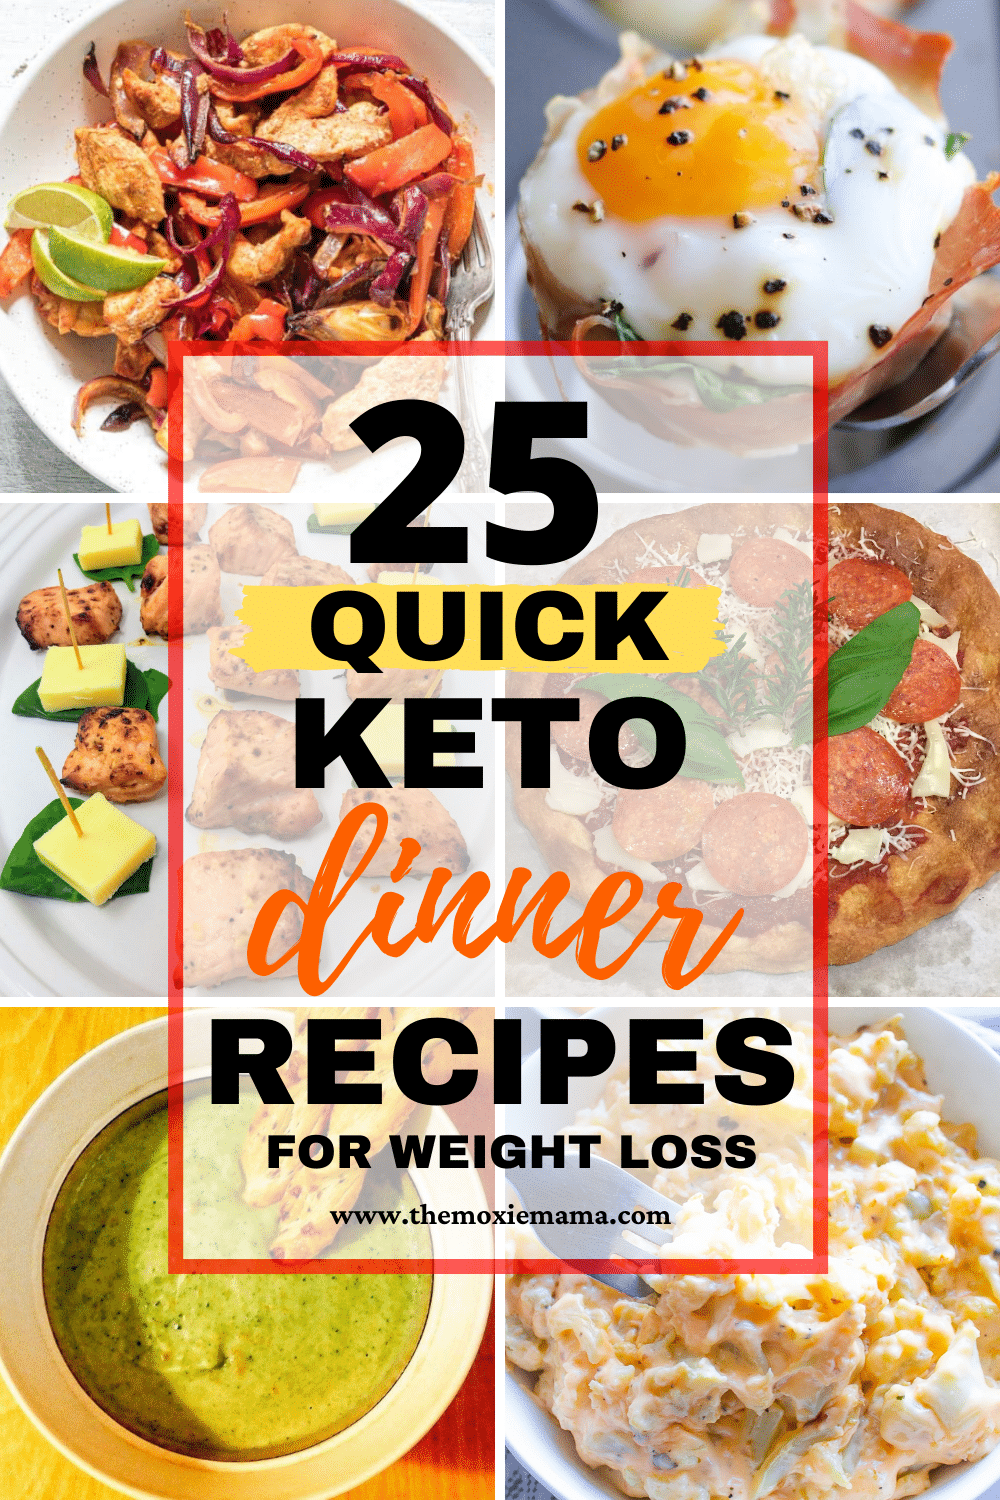 25 Quick Keto Dinner Recipes For Weight